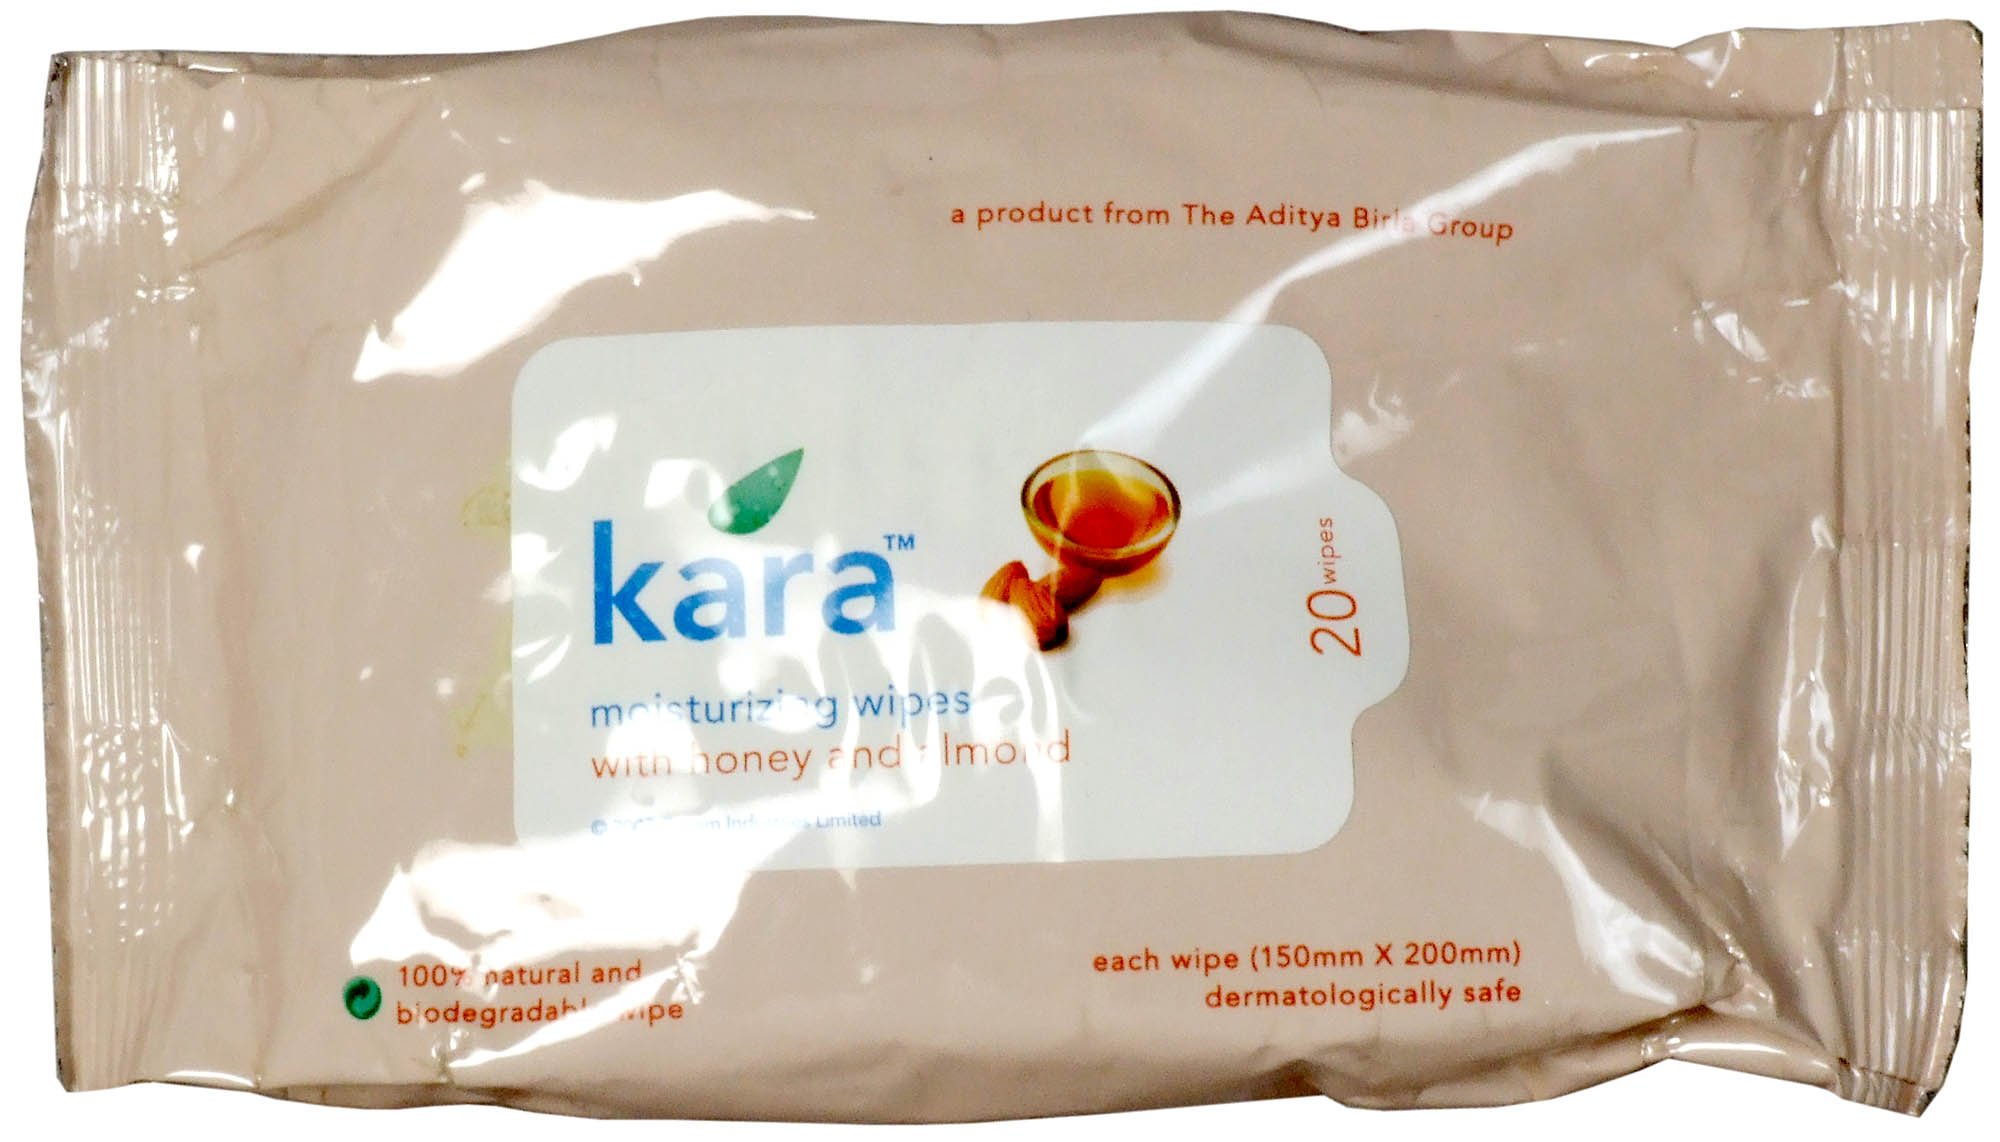 Kara Moisturizing Wipes with Honey and Almond - book cover